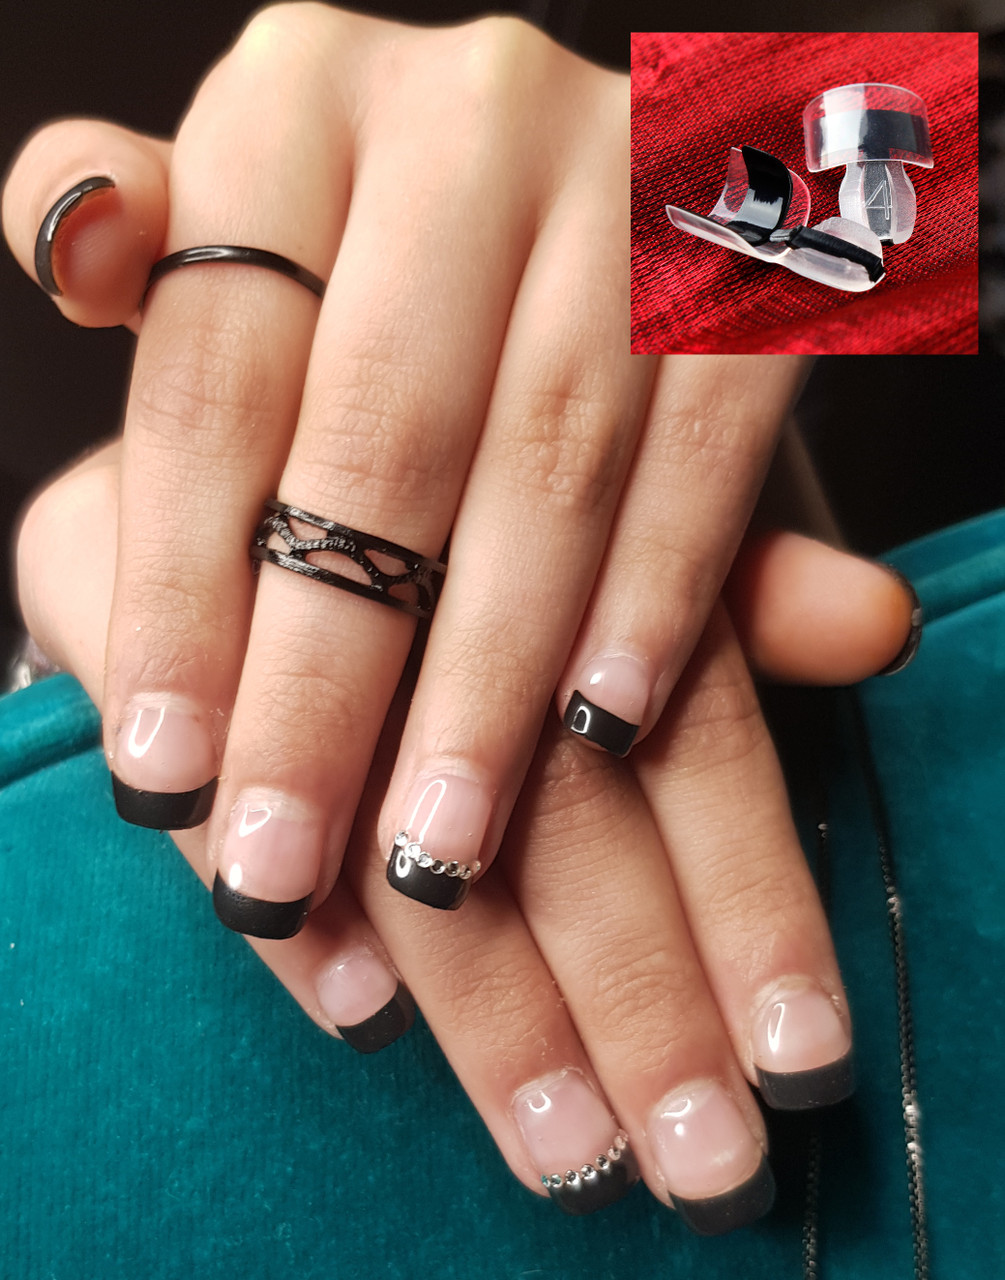 ORLY FRENCH MANICURE HOW TO – ORLY Beauty UK